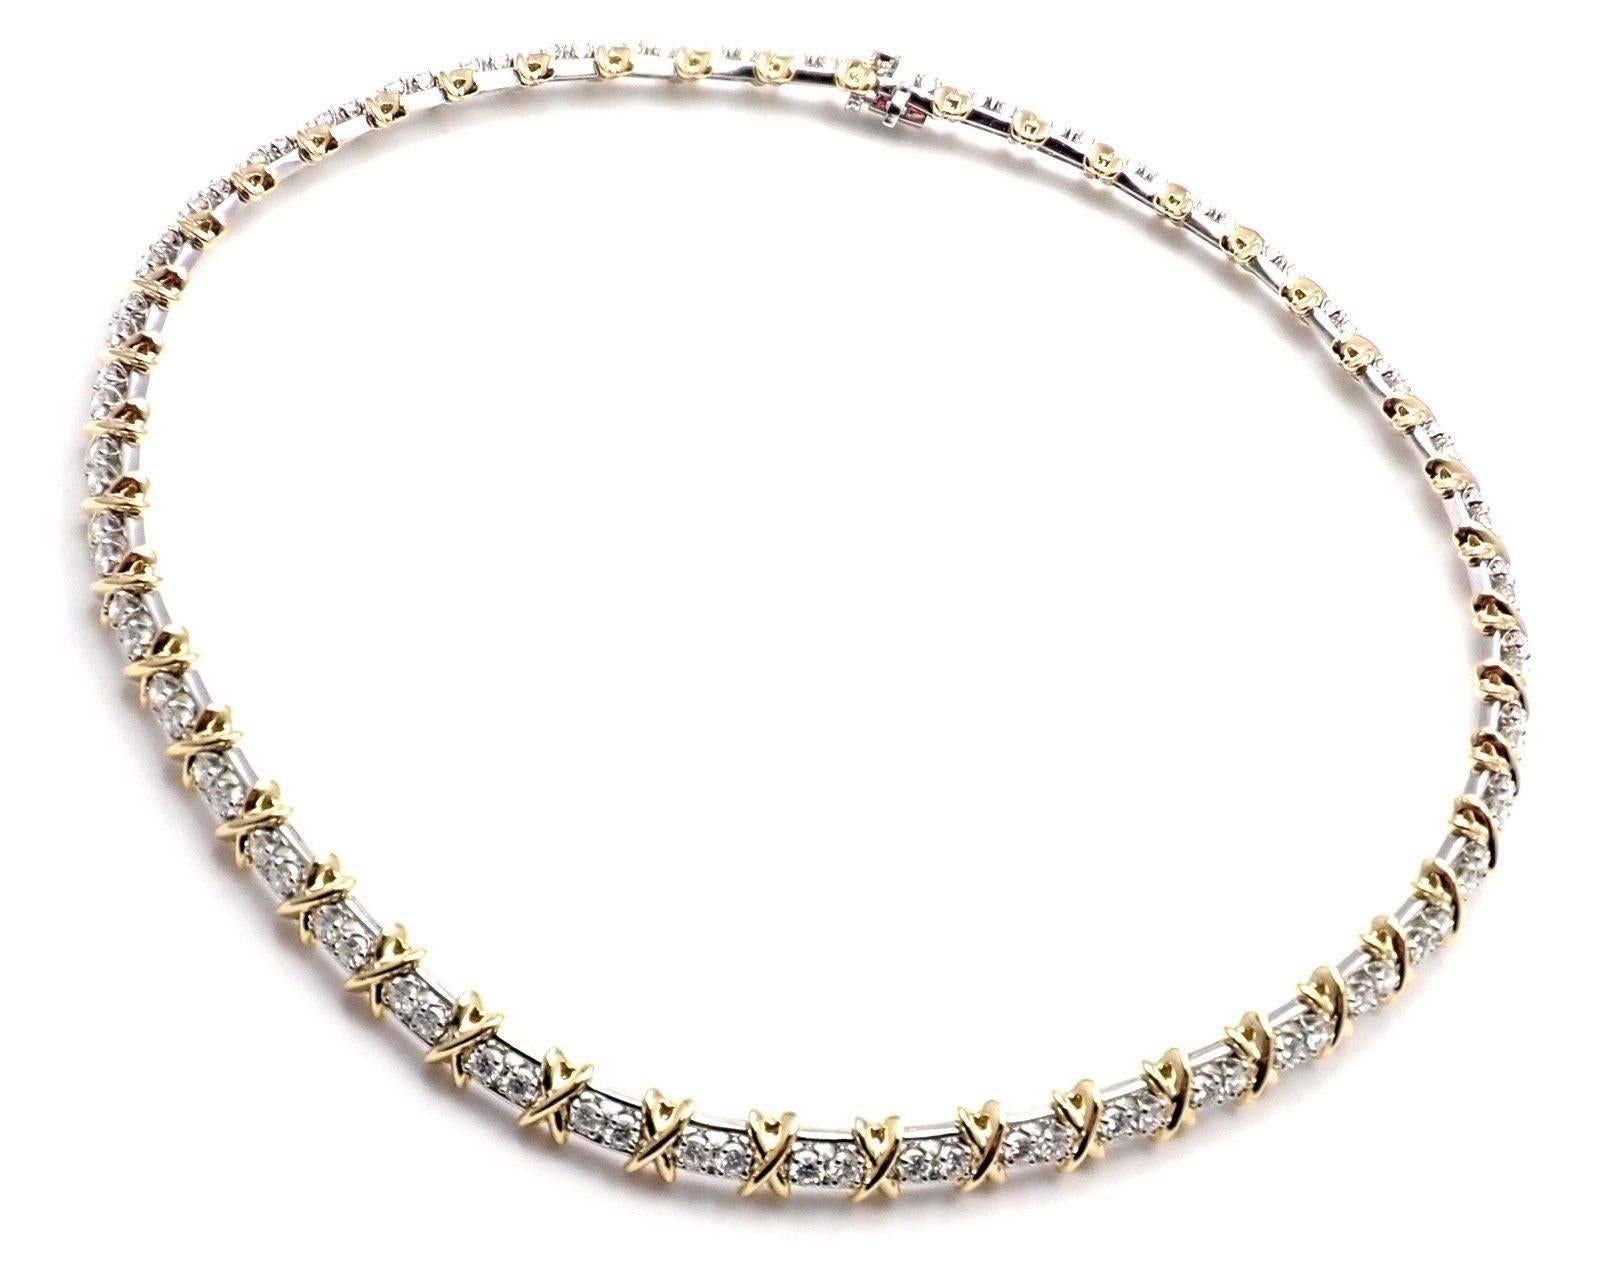 Platinum & 18k Yellow Gold Diamond X Necklace by Jean Schlumberger for Tiffany & Co. 
With 92 round brilliant cut diamonds VS1 clarity G color total weight approx. 8.28ct
Details: 
Length: 17